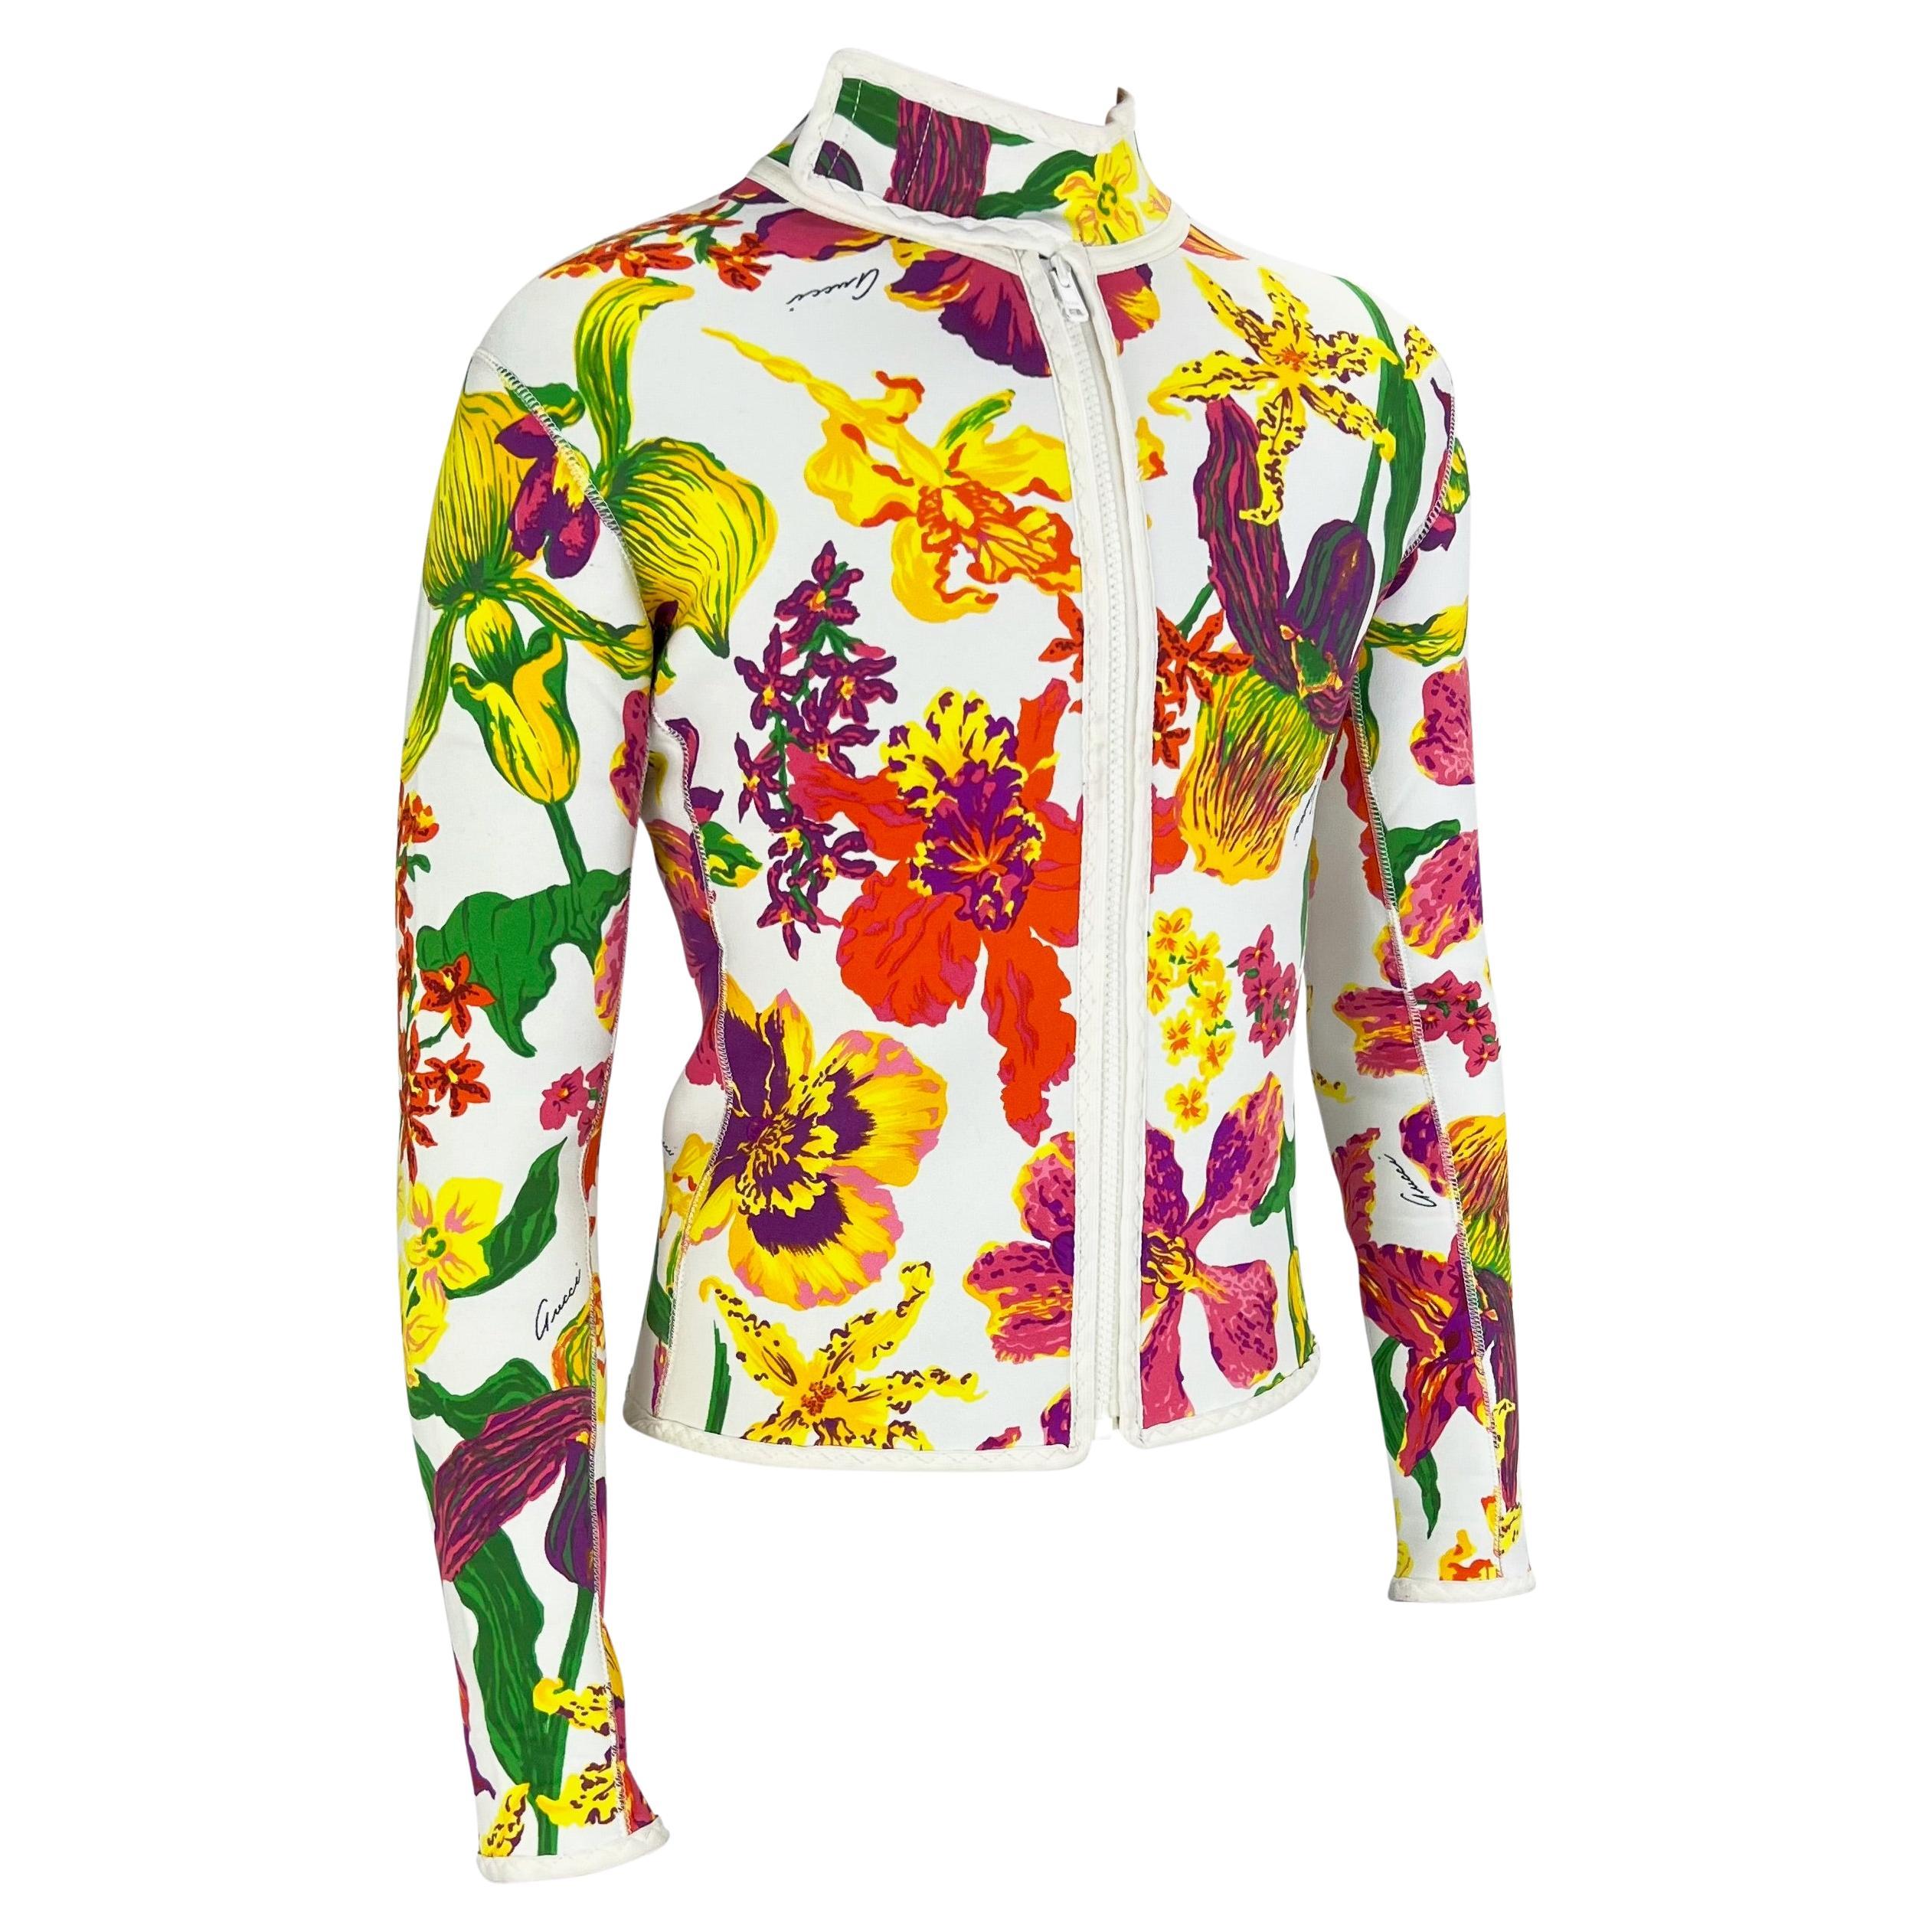 S/S 1999 Gucci by Tom Ford Men's Runway Ad White Floral Neoprene Scuba Jacket For Sale 5